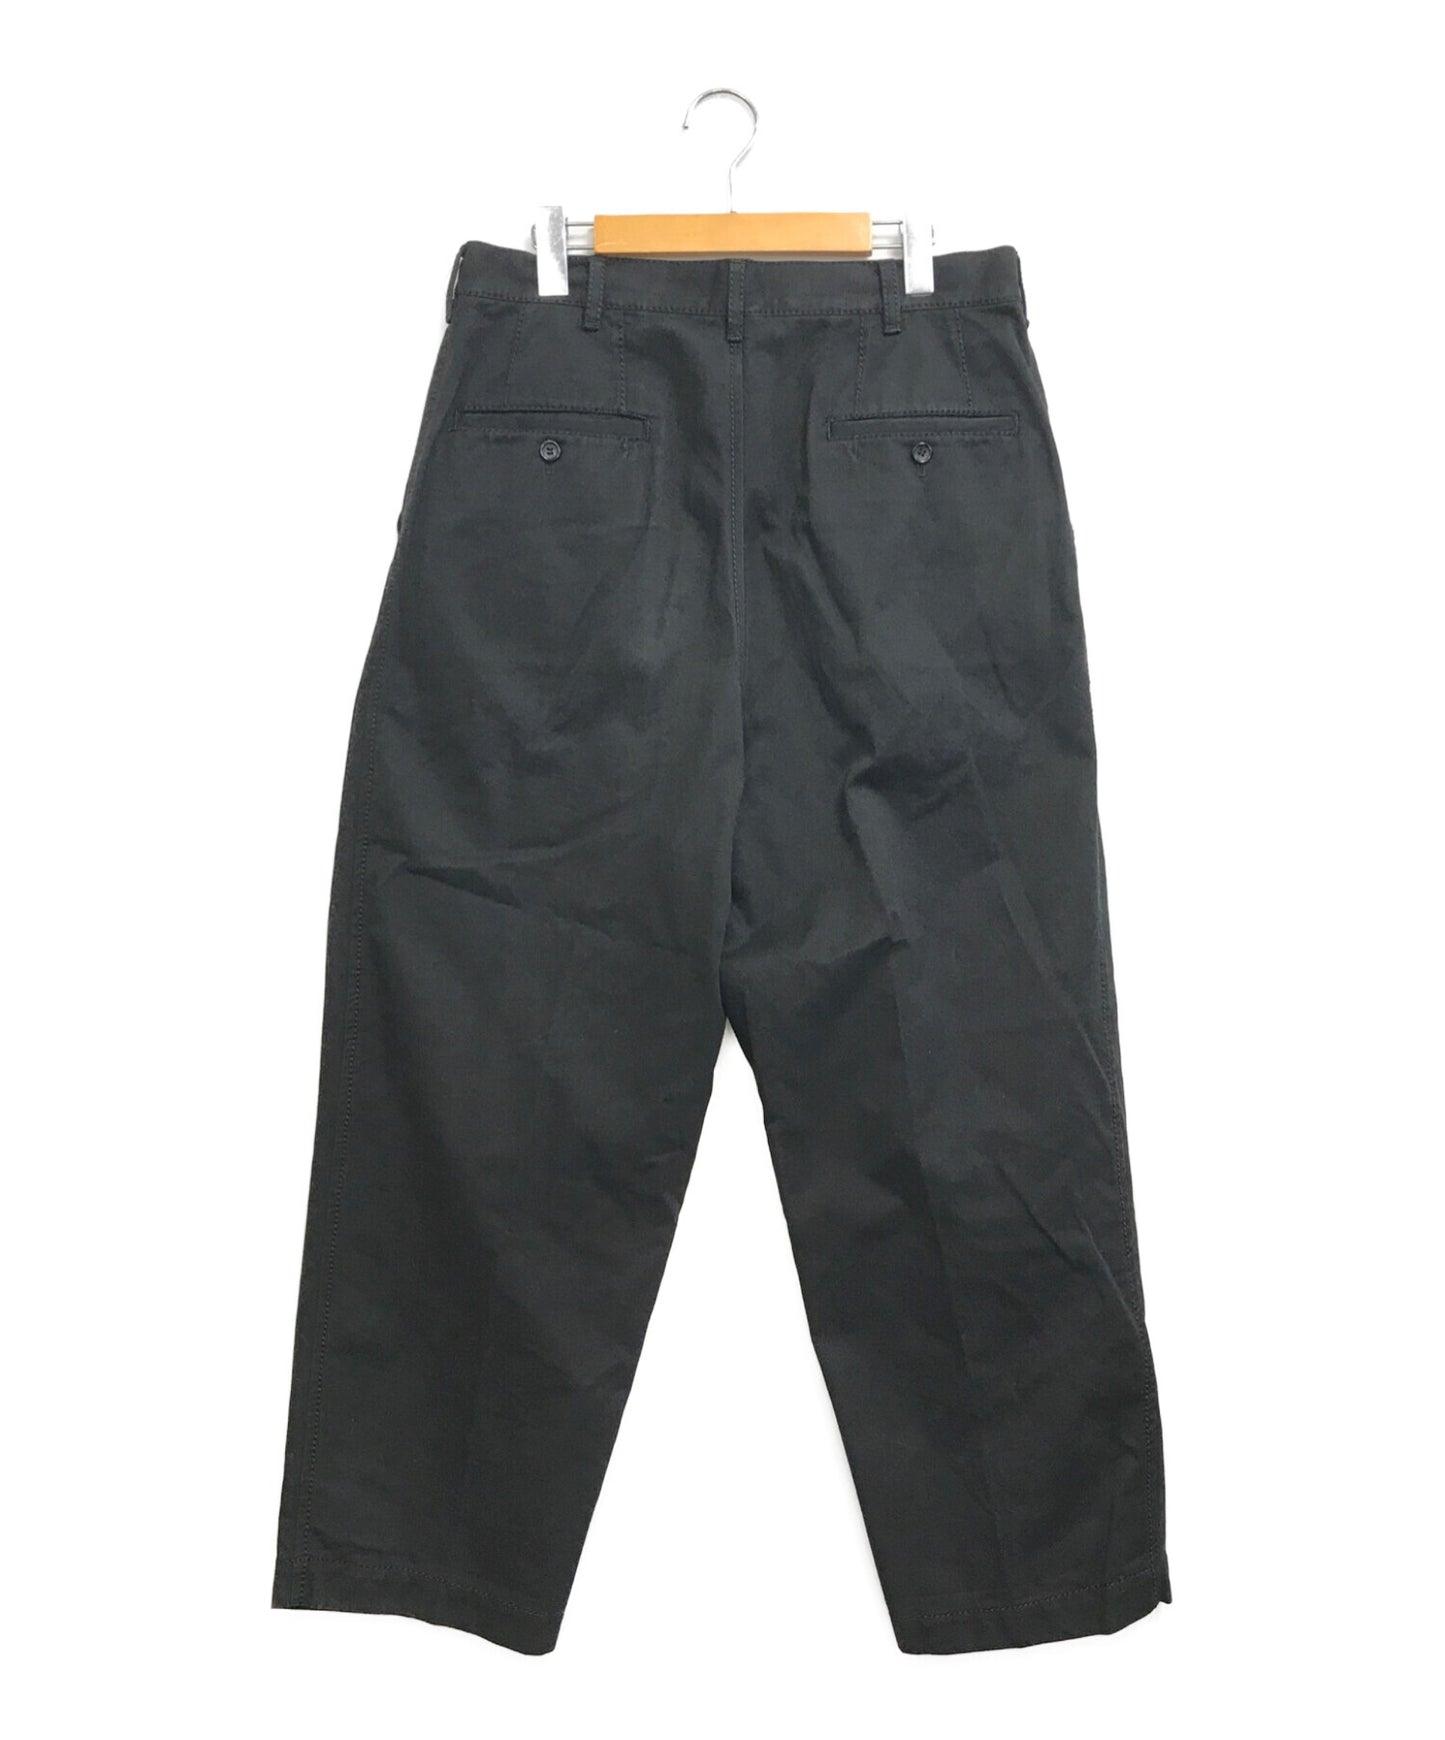 Comme des Garcons Homme Fat Stitch Tuck Chino 바지 HF-P015